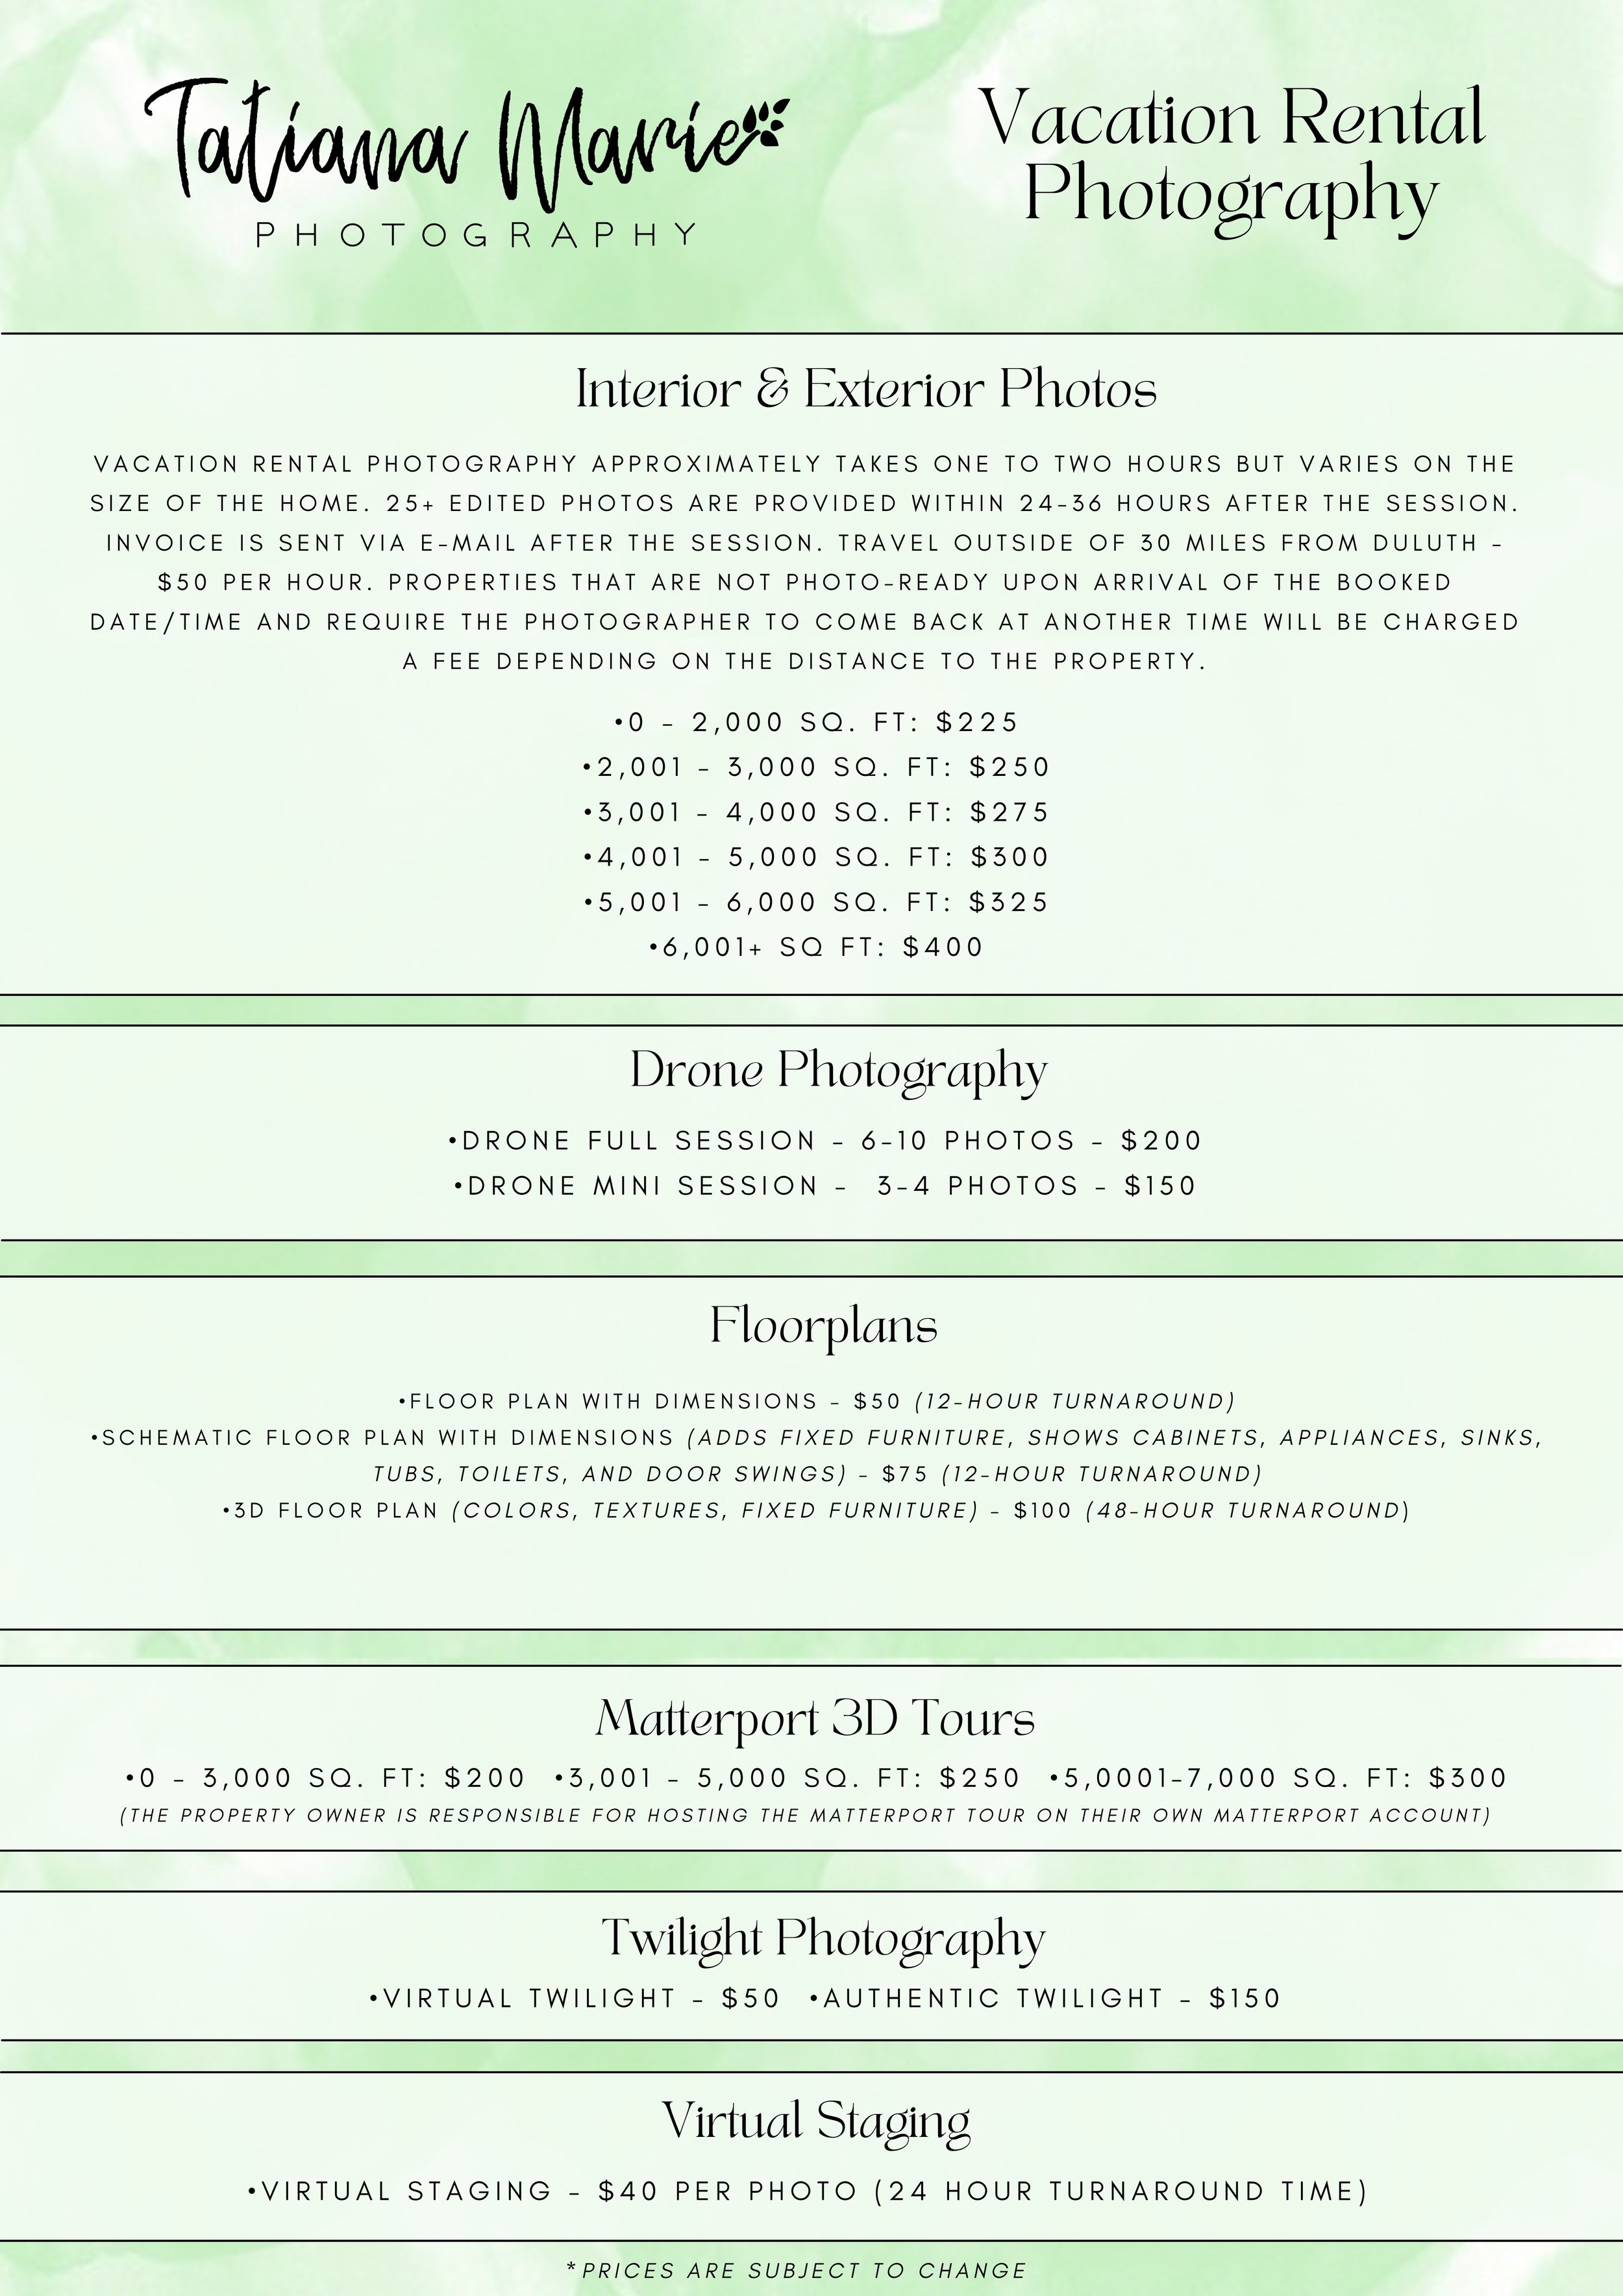 Vacation Rental Photography Pricing Guide.jpg